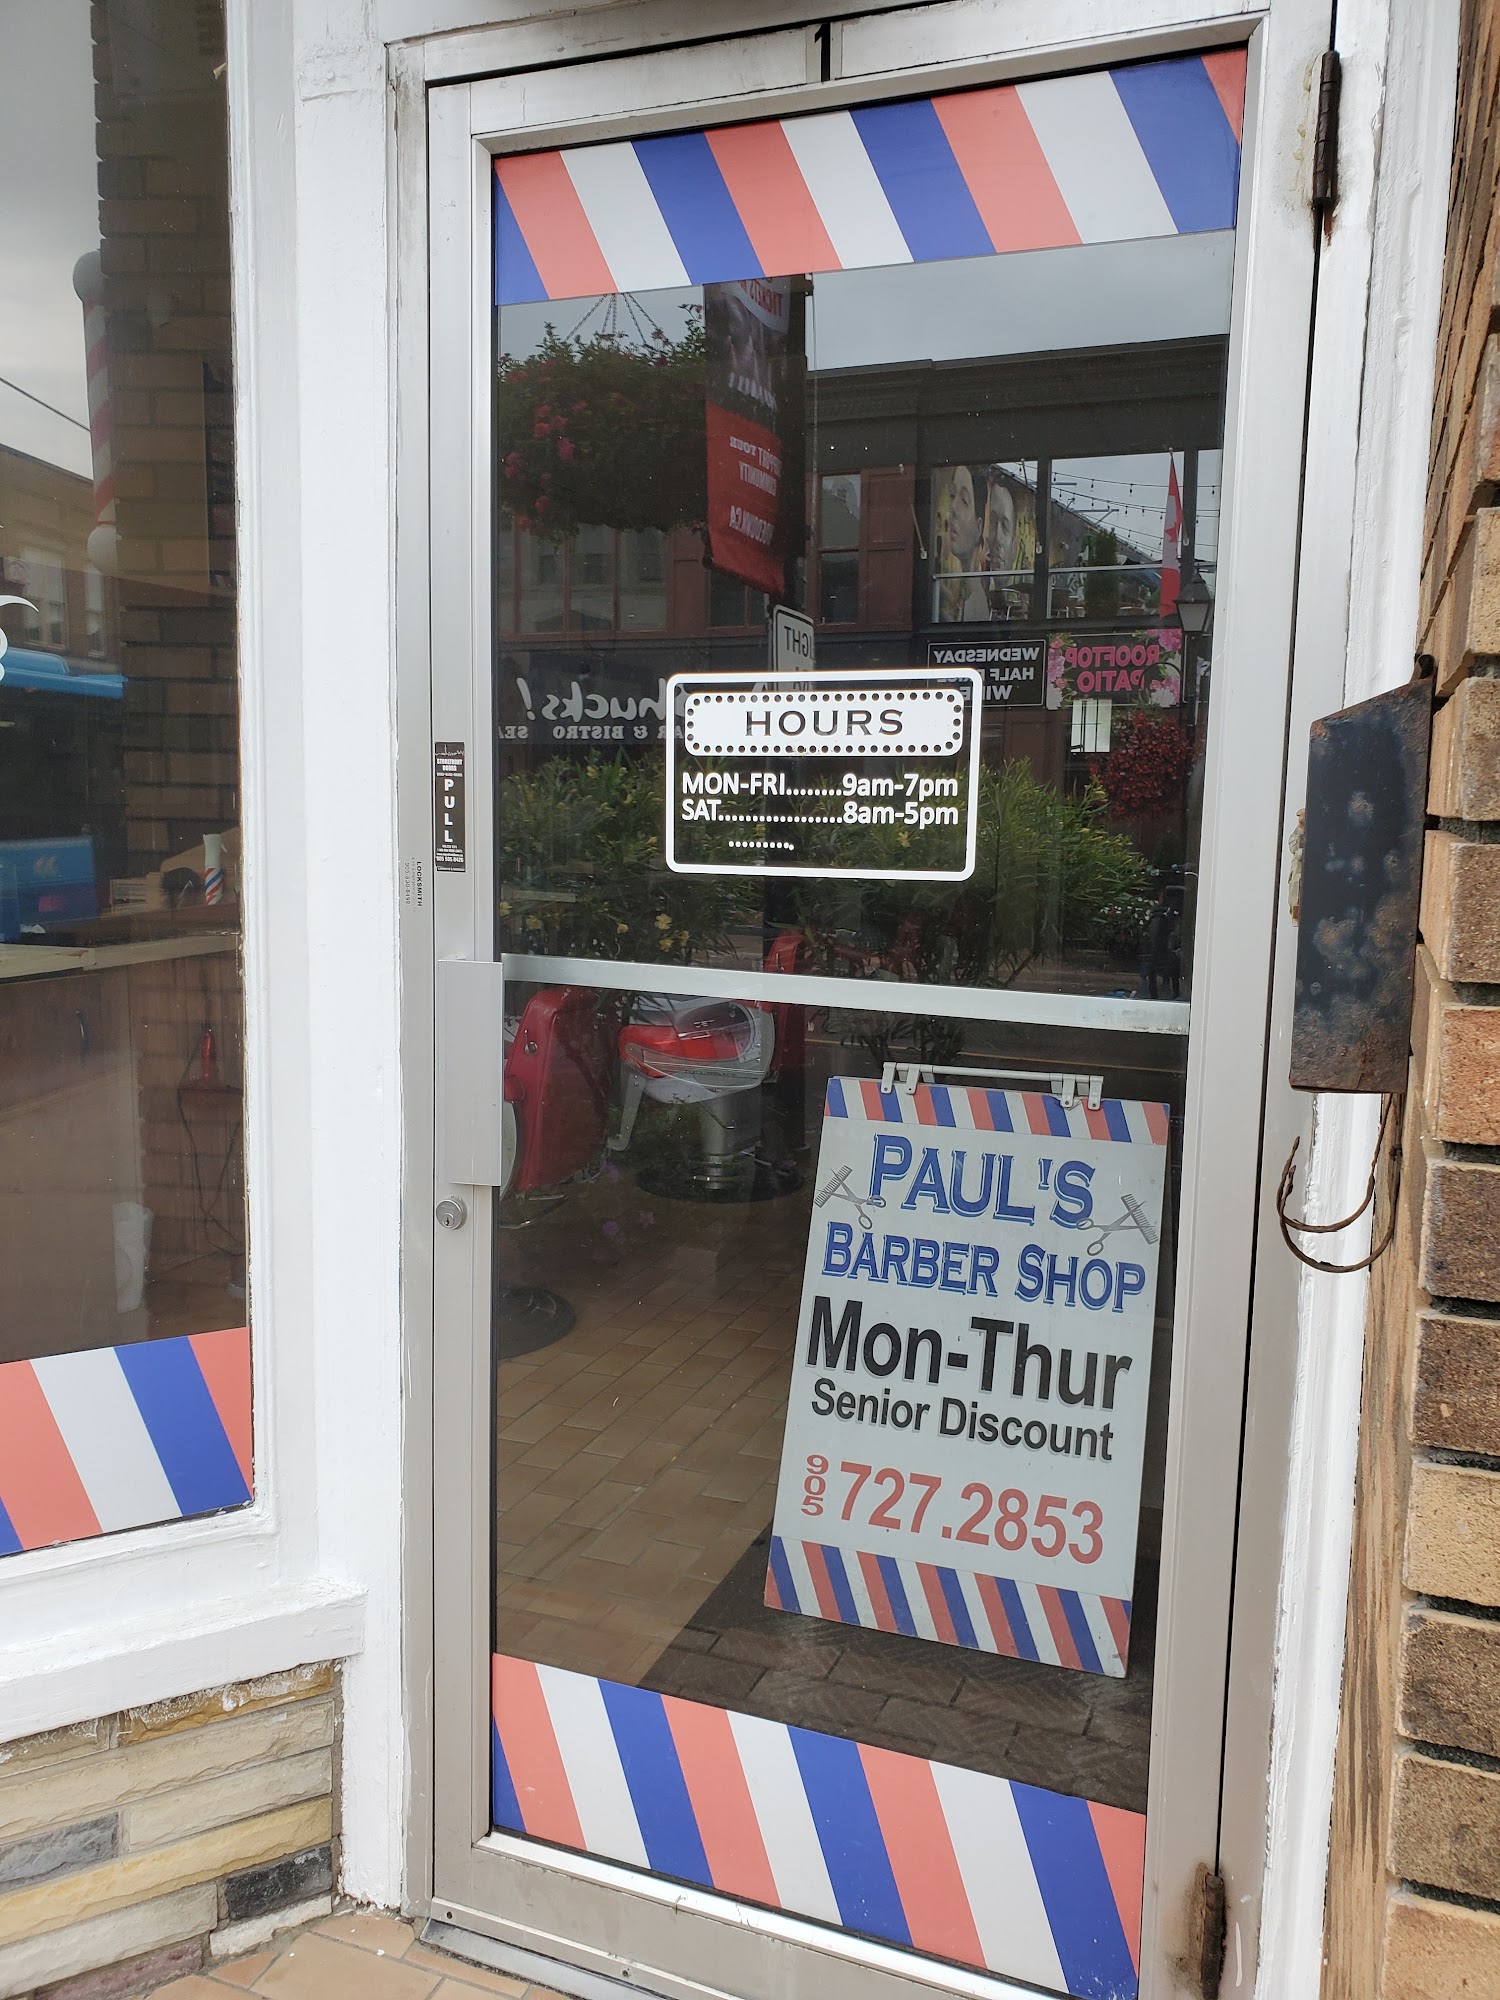 Paul's Barber Shop & Hairstyling